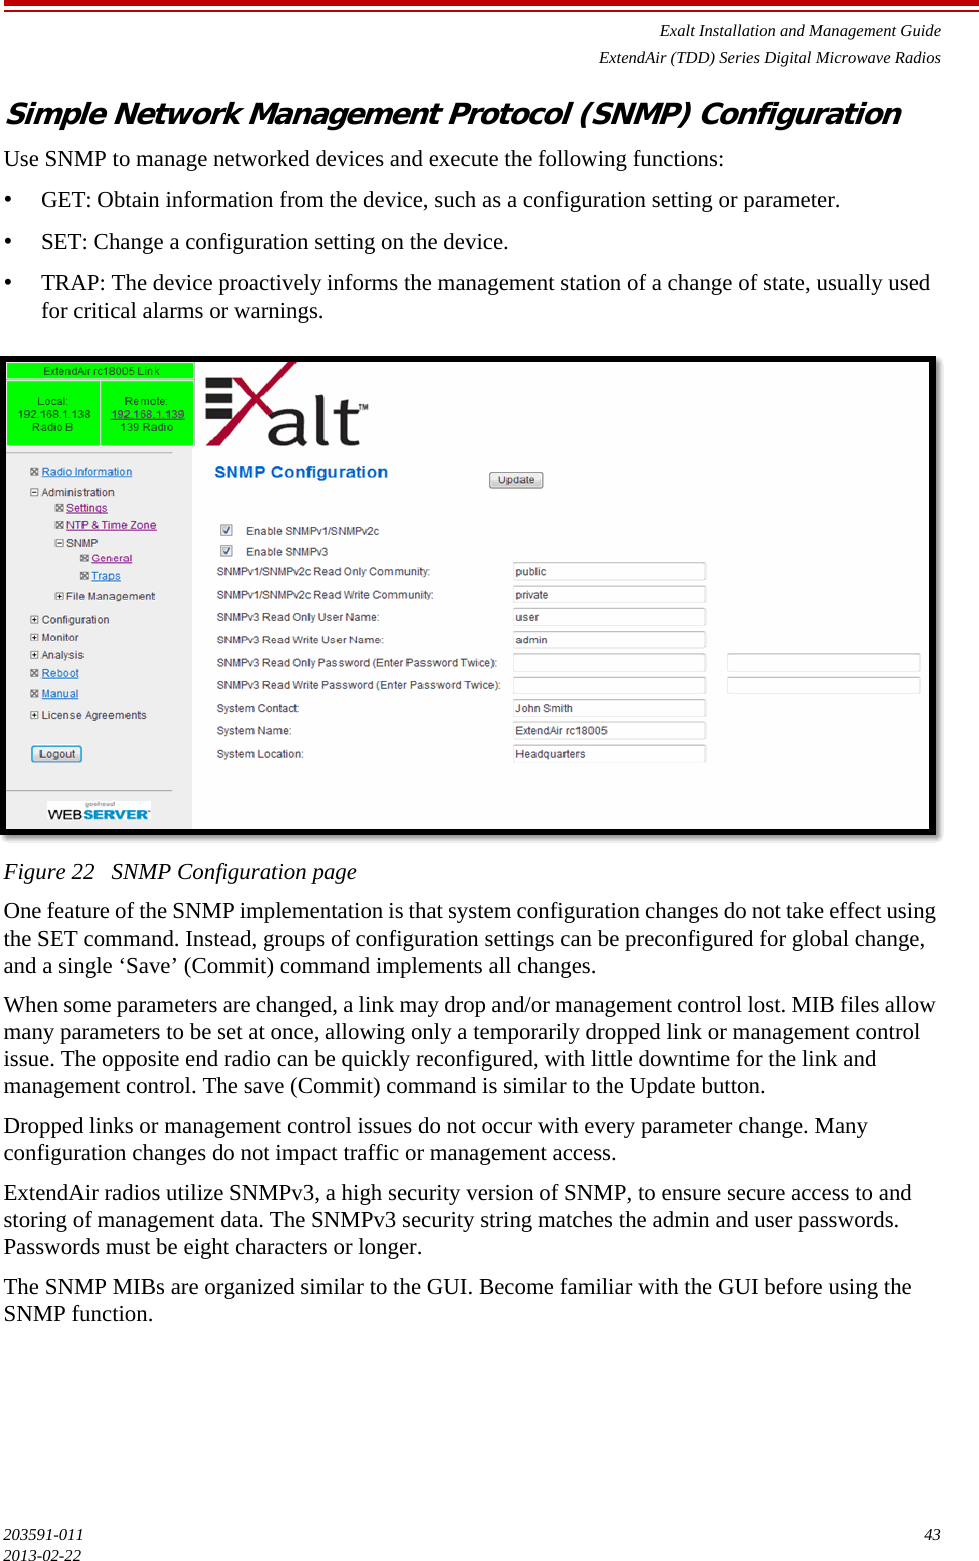 Exalt Installation and Management GuideExtendAir (TDD) Series Digital Microwave Radios203591-011 432013-02-22Simple Network Management Protocol (SNMP) ConfigurationUse SNMP to manage networked devices and execute the following functions:•GET: Obtain information from the device, such as a configuration setting or parameter.•SET: Change a configuration setting on the device.•TRAP: The device proactively informs the management station of a change of state, usually used for critical alarms or warnings.Figure 22   SNMP Configuration pageOne feature of the SNMP implementation is that system configuration changes do not take effect using the SET command. Instead, groups of configuration settings can be preconfigured for global change, and a single ‘Save’ (Commit) command implements all changes.When some parameters are changed, a link may drop and/or management control lost. MIB files allow many parameters to be set at once, allowing only a temporarily dropped link or management control issue. The opposite end radio can be quickly reconfigured, with little downtime for the link and management control. The save (Commit) command is similar to the Update button. Dropped links or management control issues do not occur with every parameter change. Many configuration changes do not impact traffic or management access.ExtendAir radios utilize SNMPv3, a high security version of SNMP, to ensure secure access to and storing of management data. The SNMPv3 security string matches the admin and user passwords. Passwords must be eight characters or longer.The SNMP MIBs are organized similar to the GUI. Become familiar with the GUI before using the SNMP function.